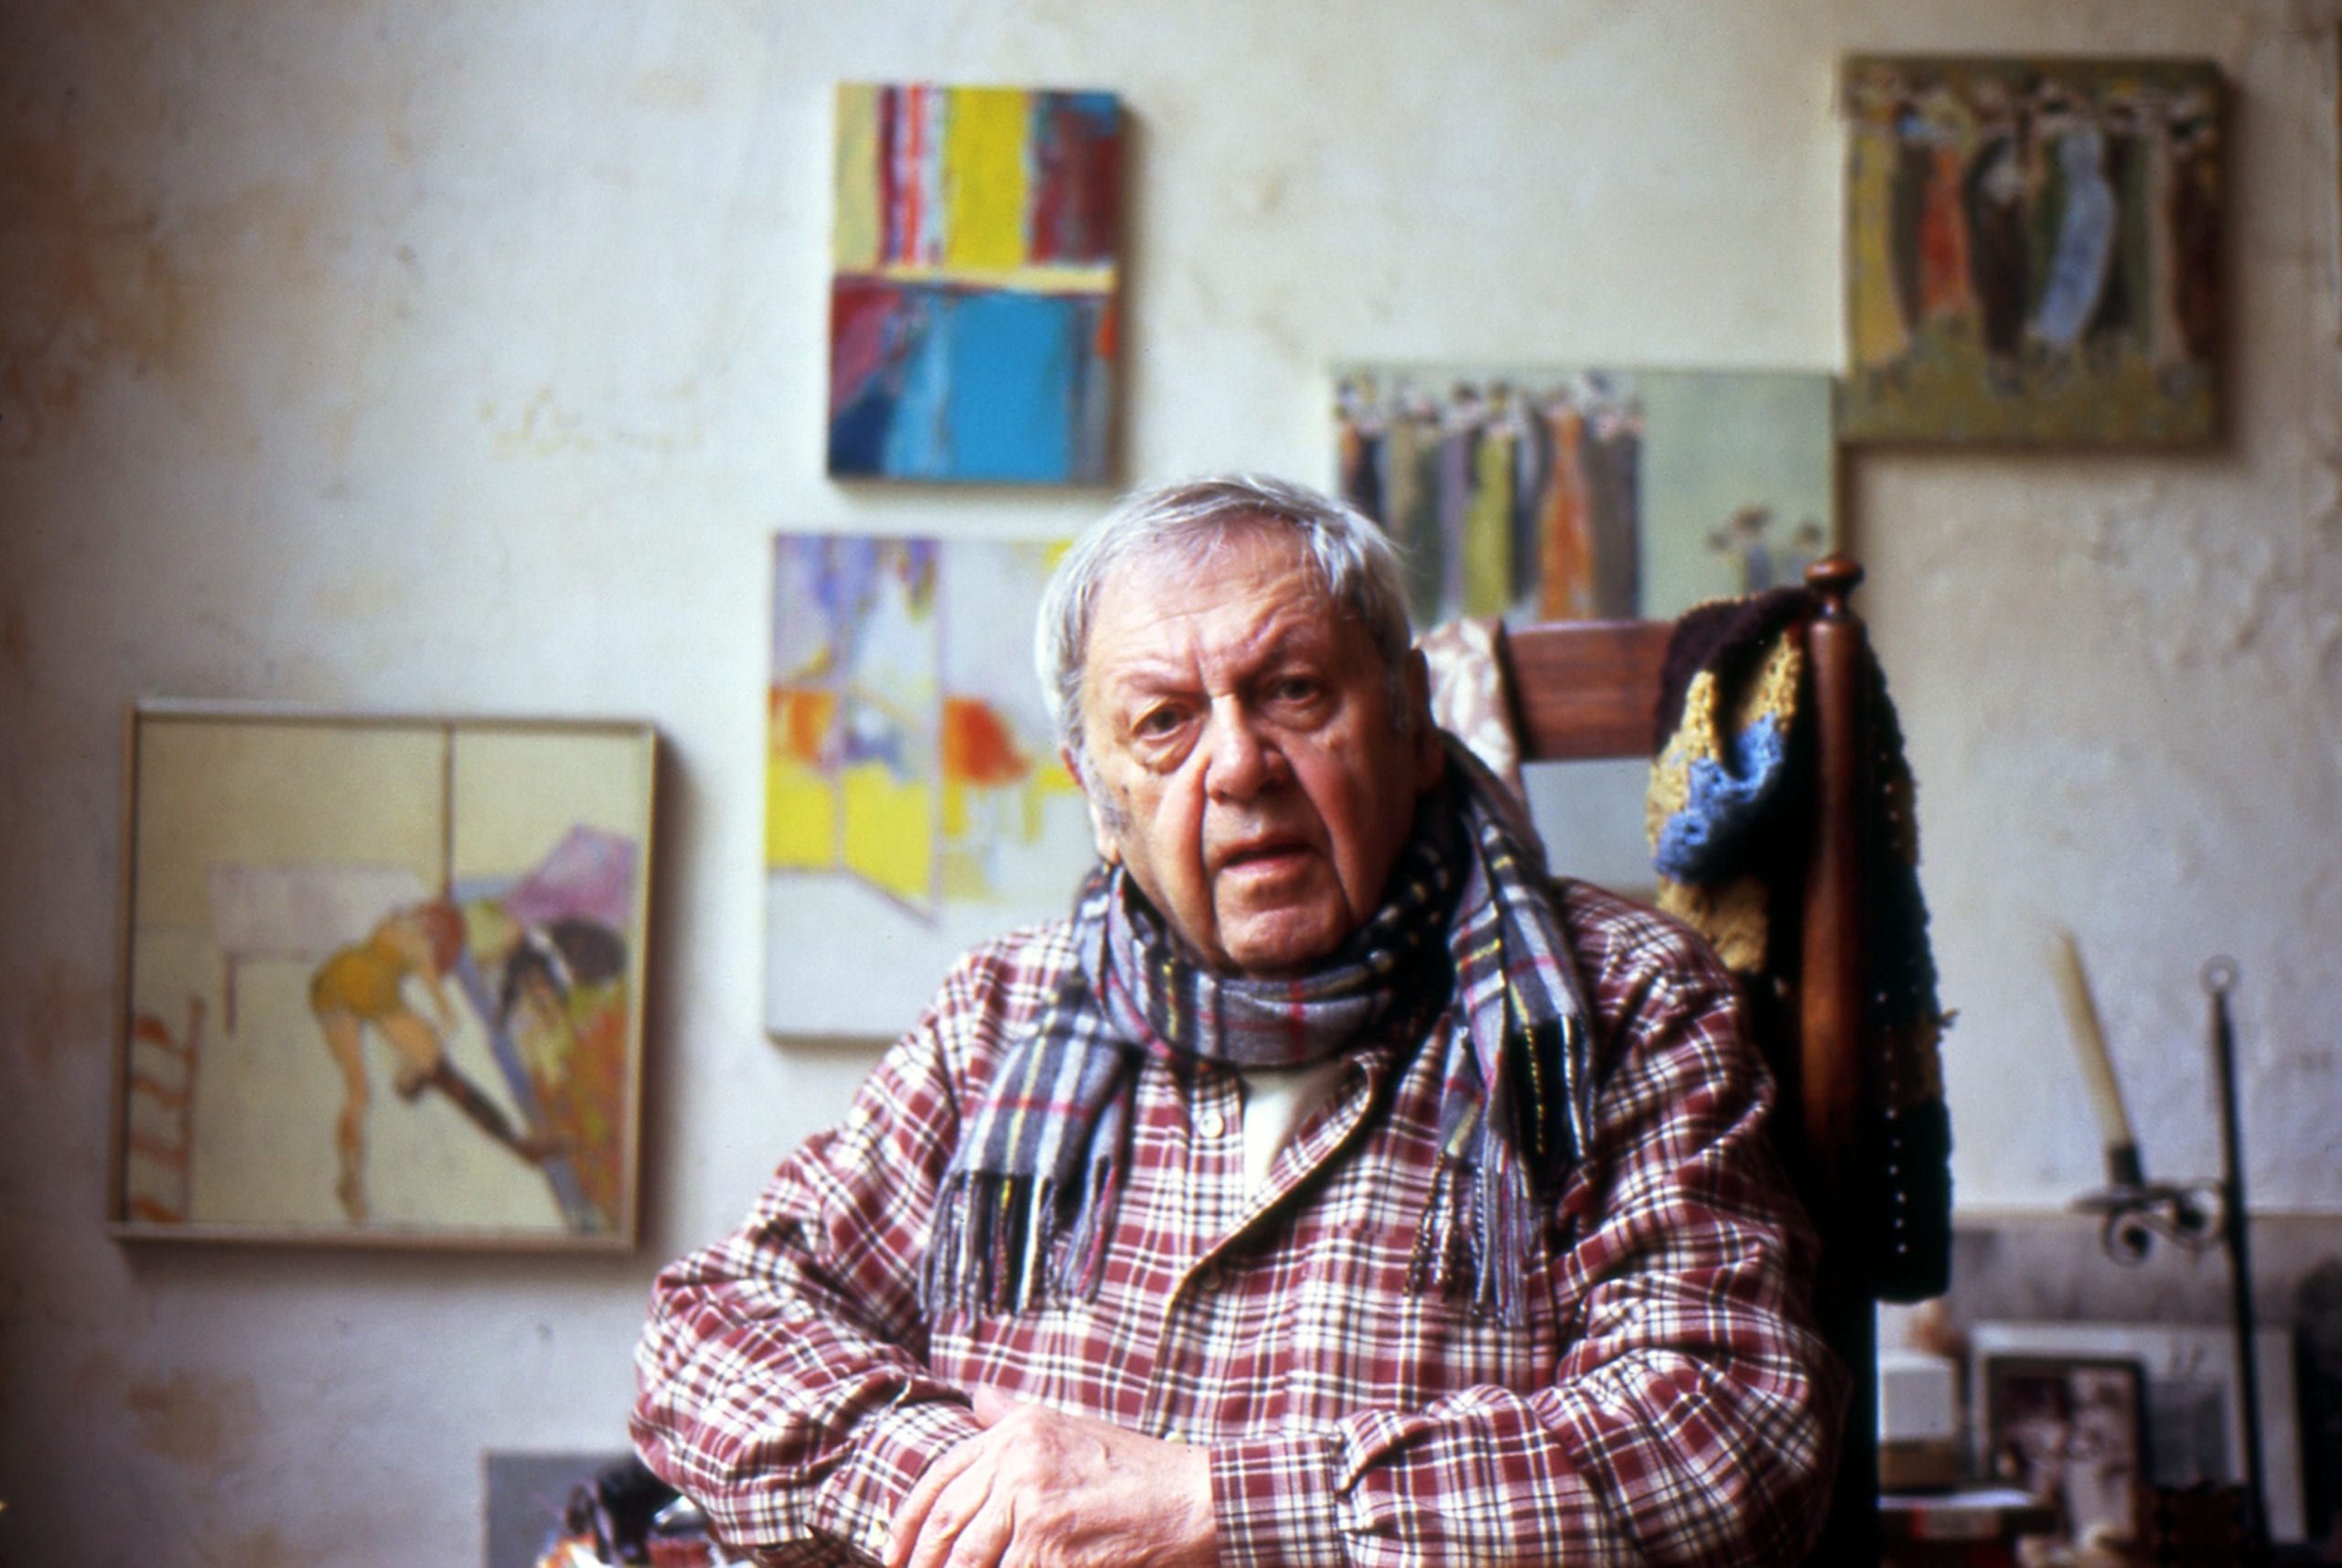 Photographer Saul Leiter has died [update] – British Journal of Photography